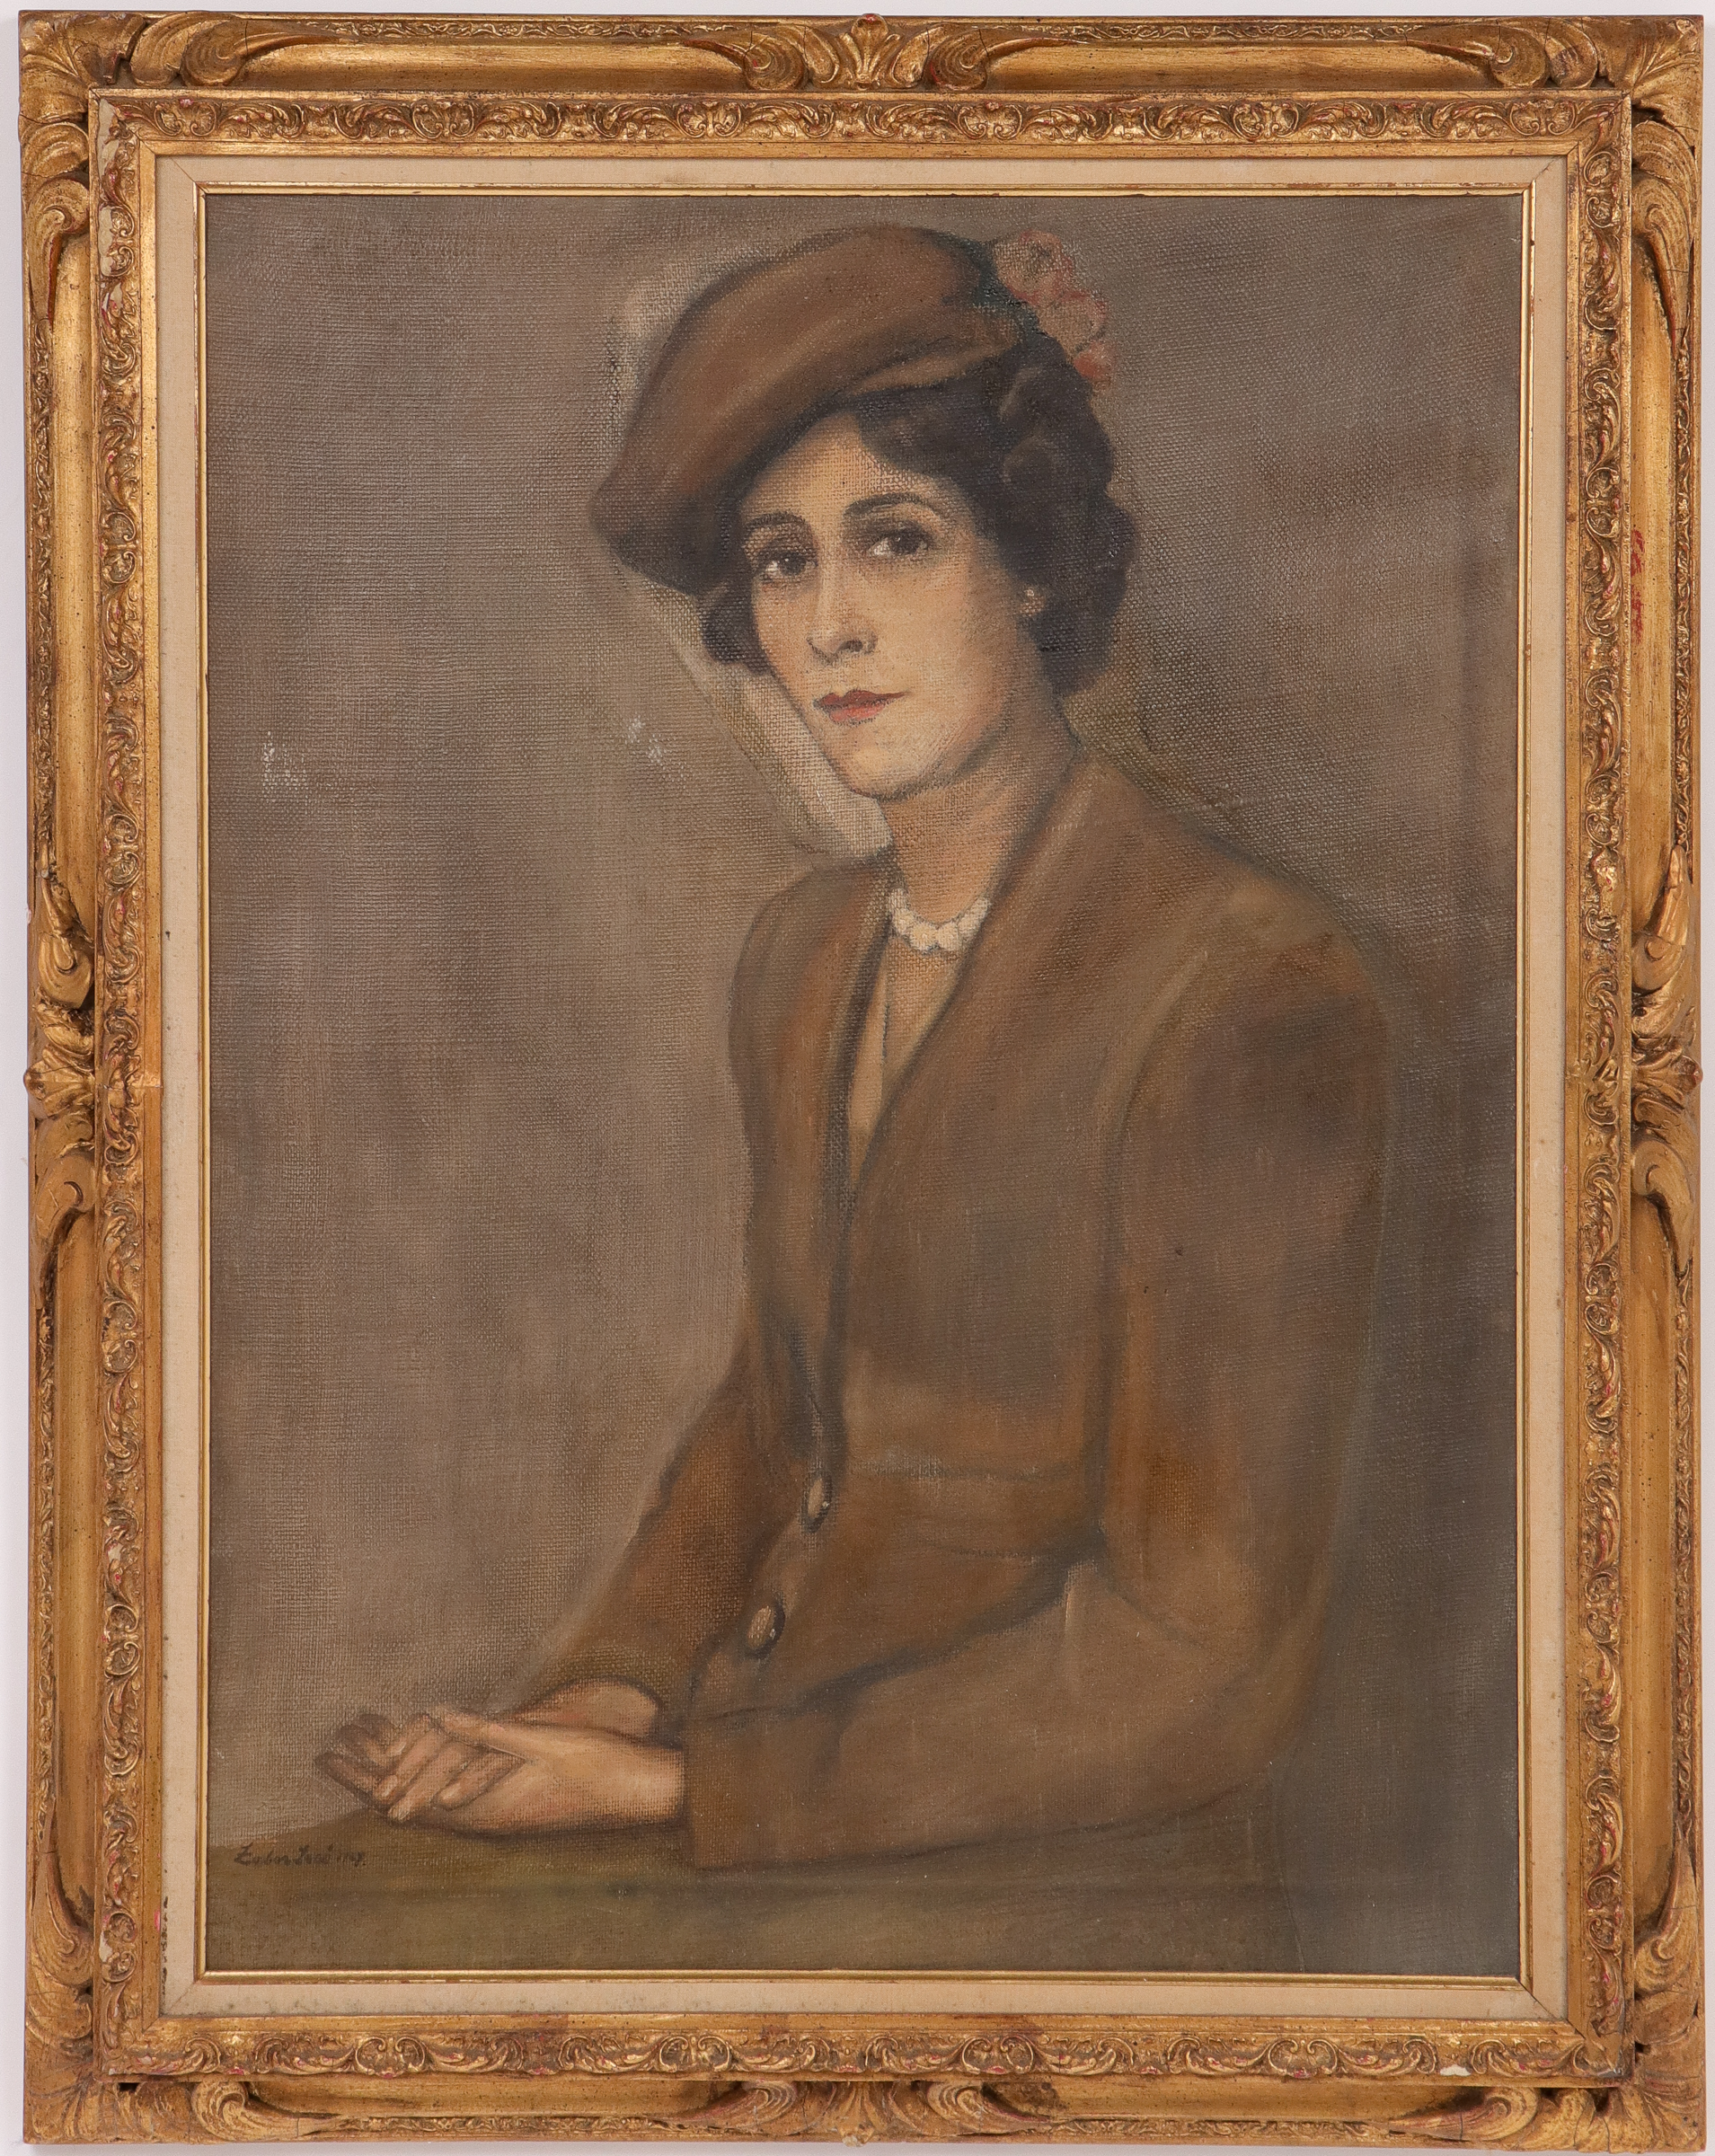 ILLEGIBLY SIGNED "PORTRAIT OF LADY"